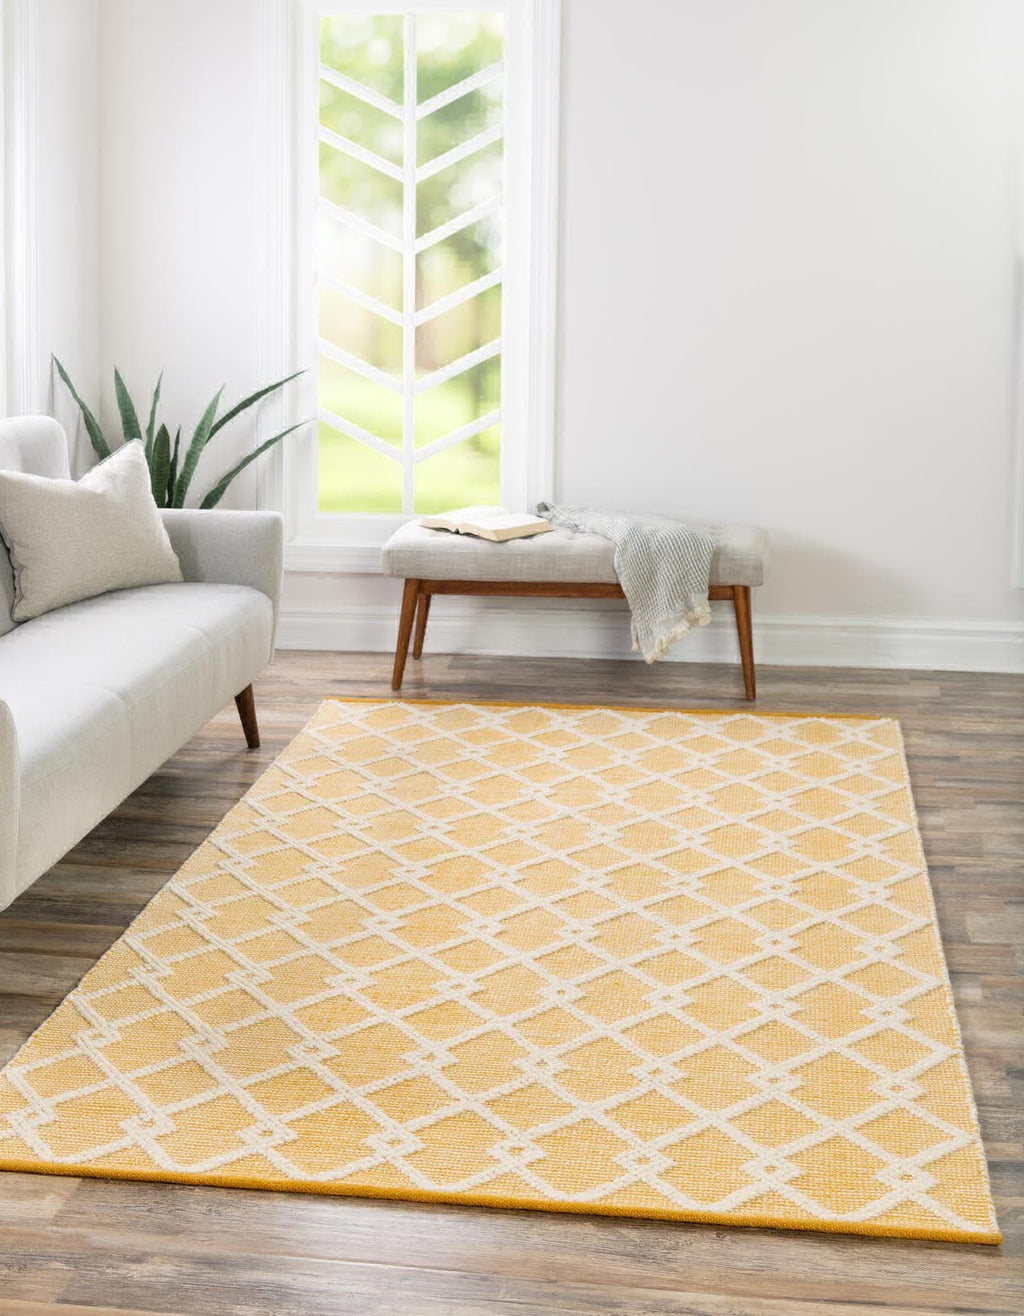 Unique Loom Dorset RET-JZM2 English Daisy Area Rug by Jill Zarin 2' 2'' X 3' 1'' Lifestyle Image Feature